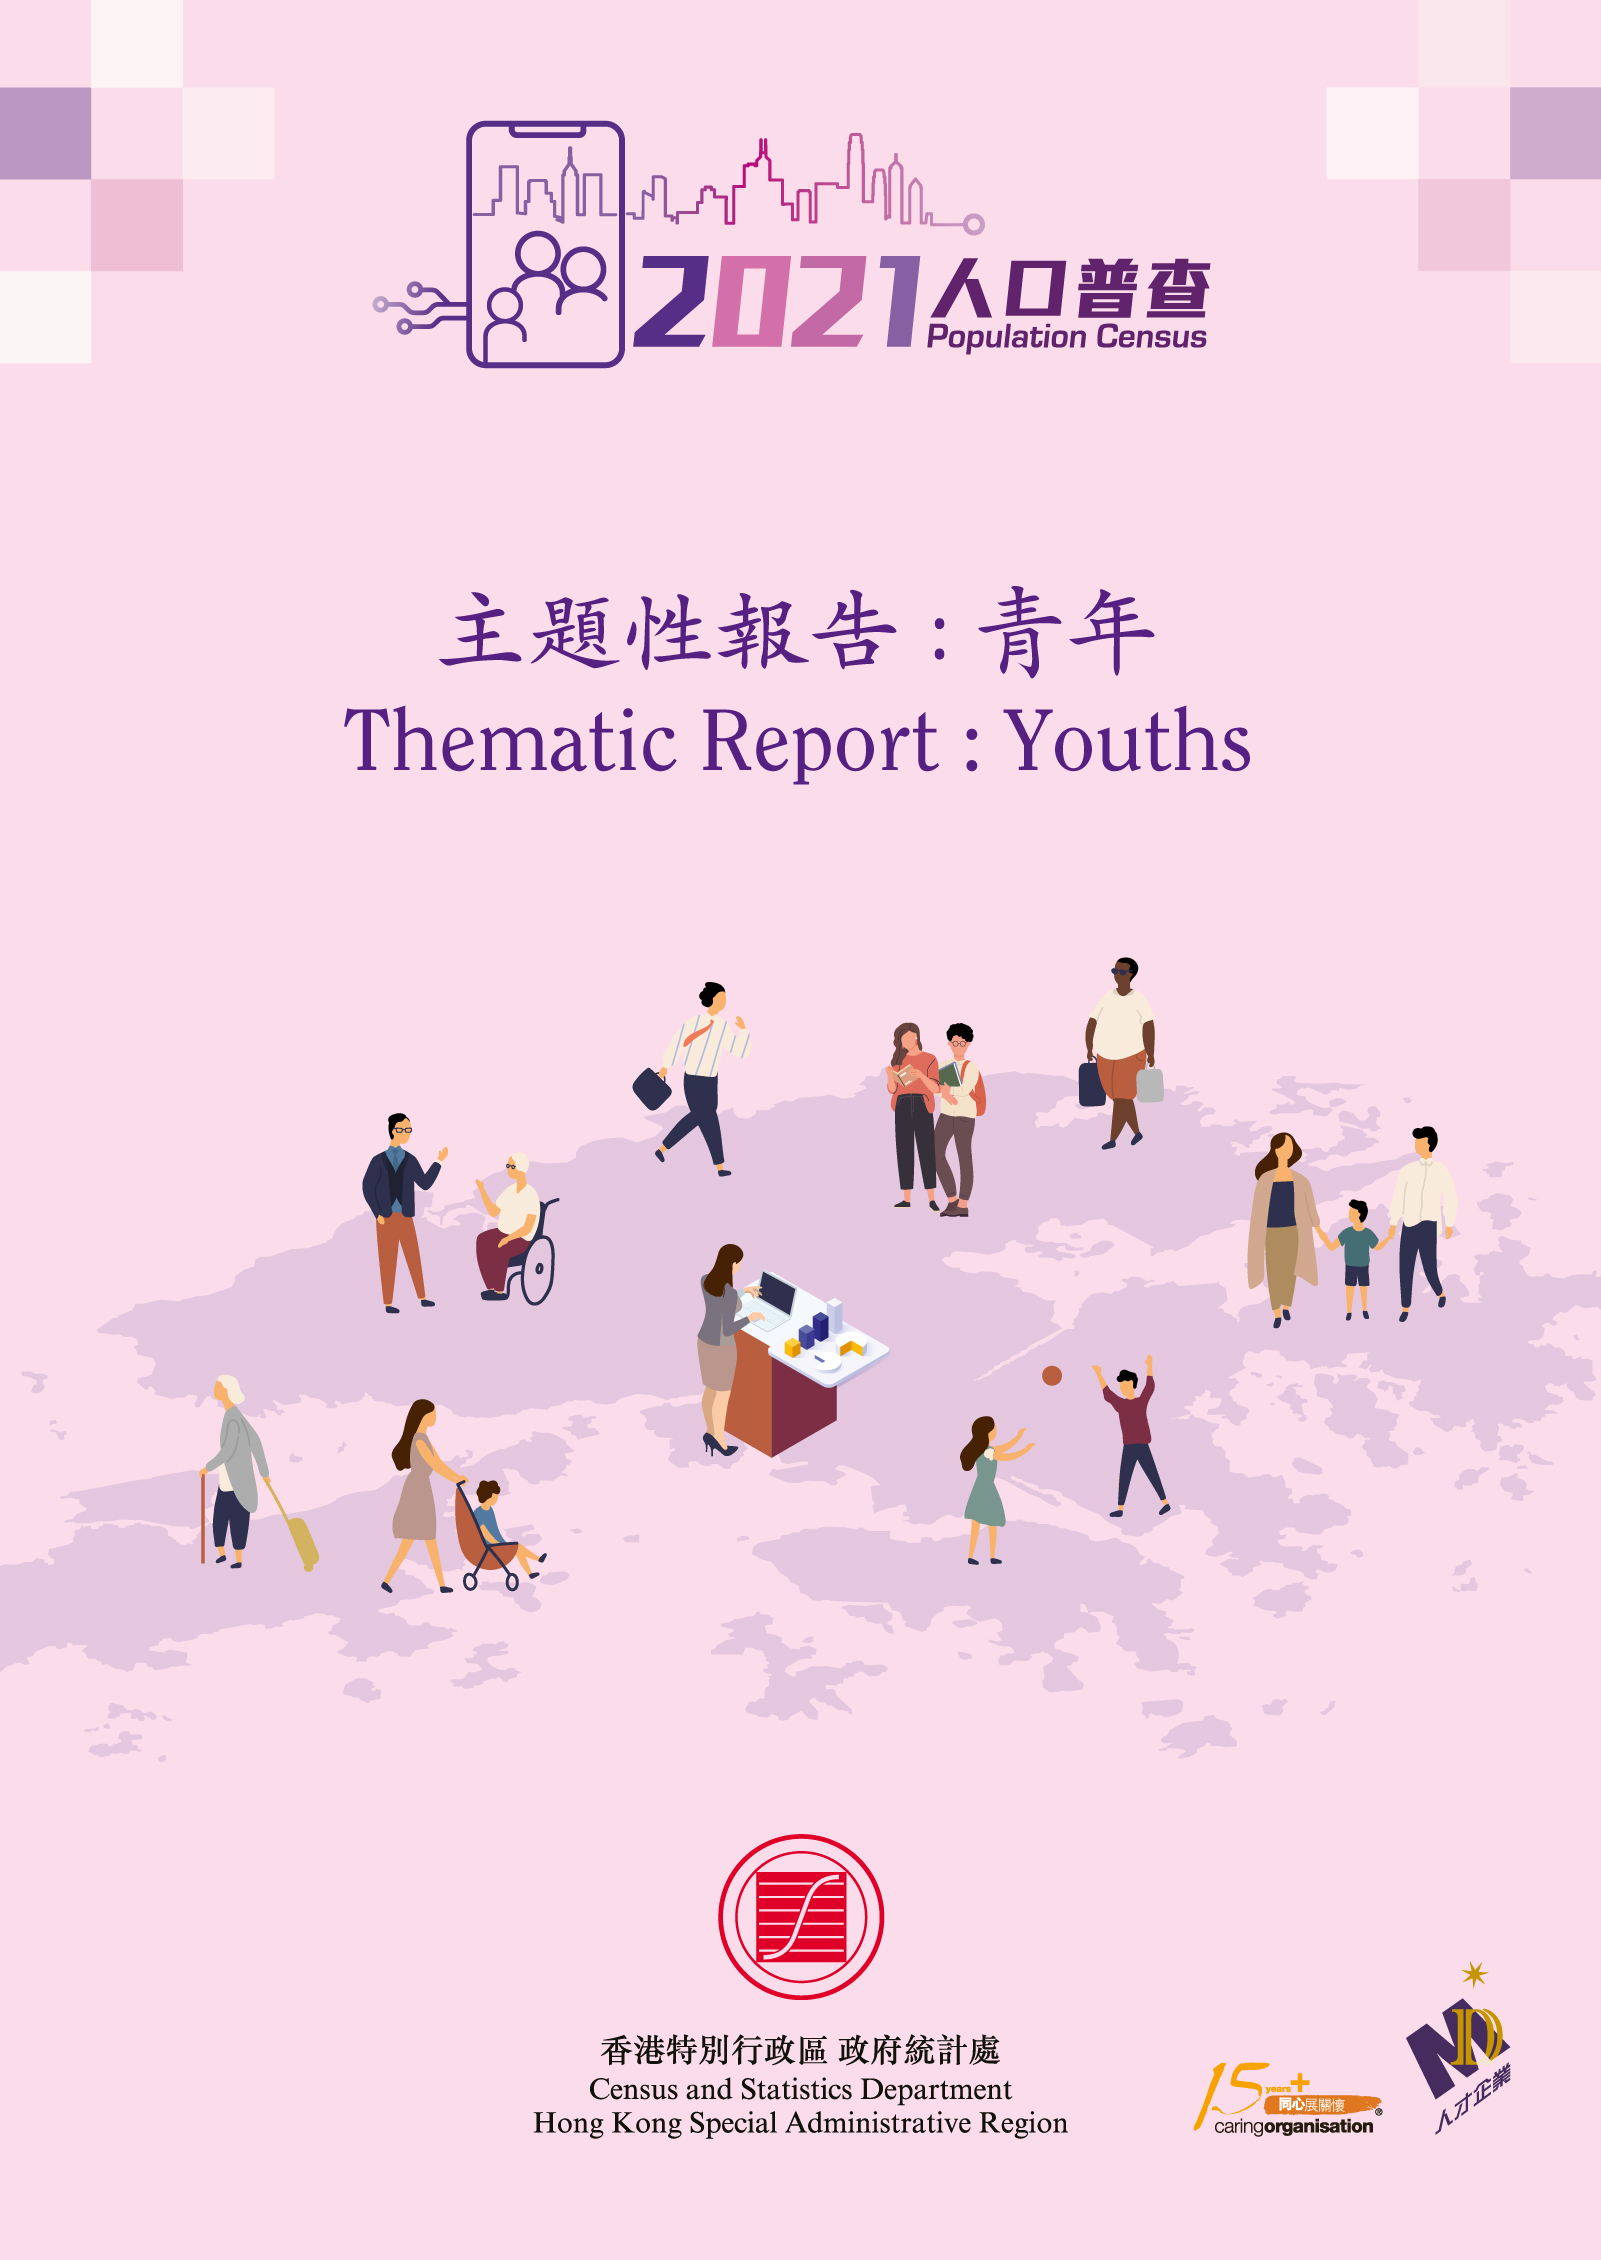 Thematic Report: Youths